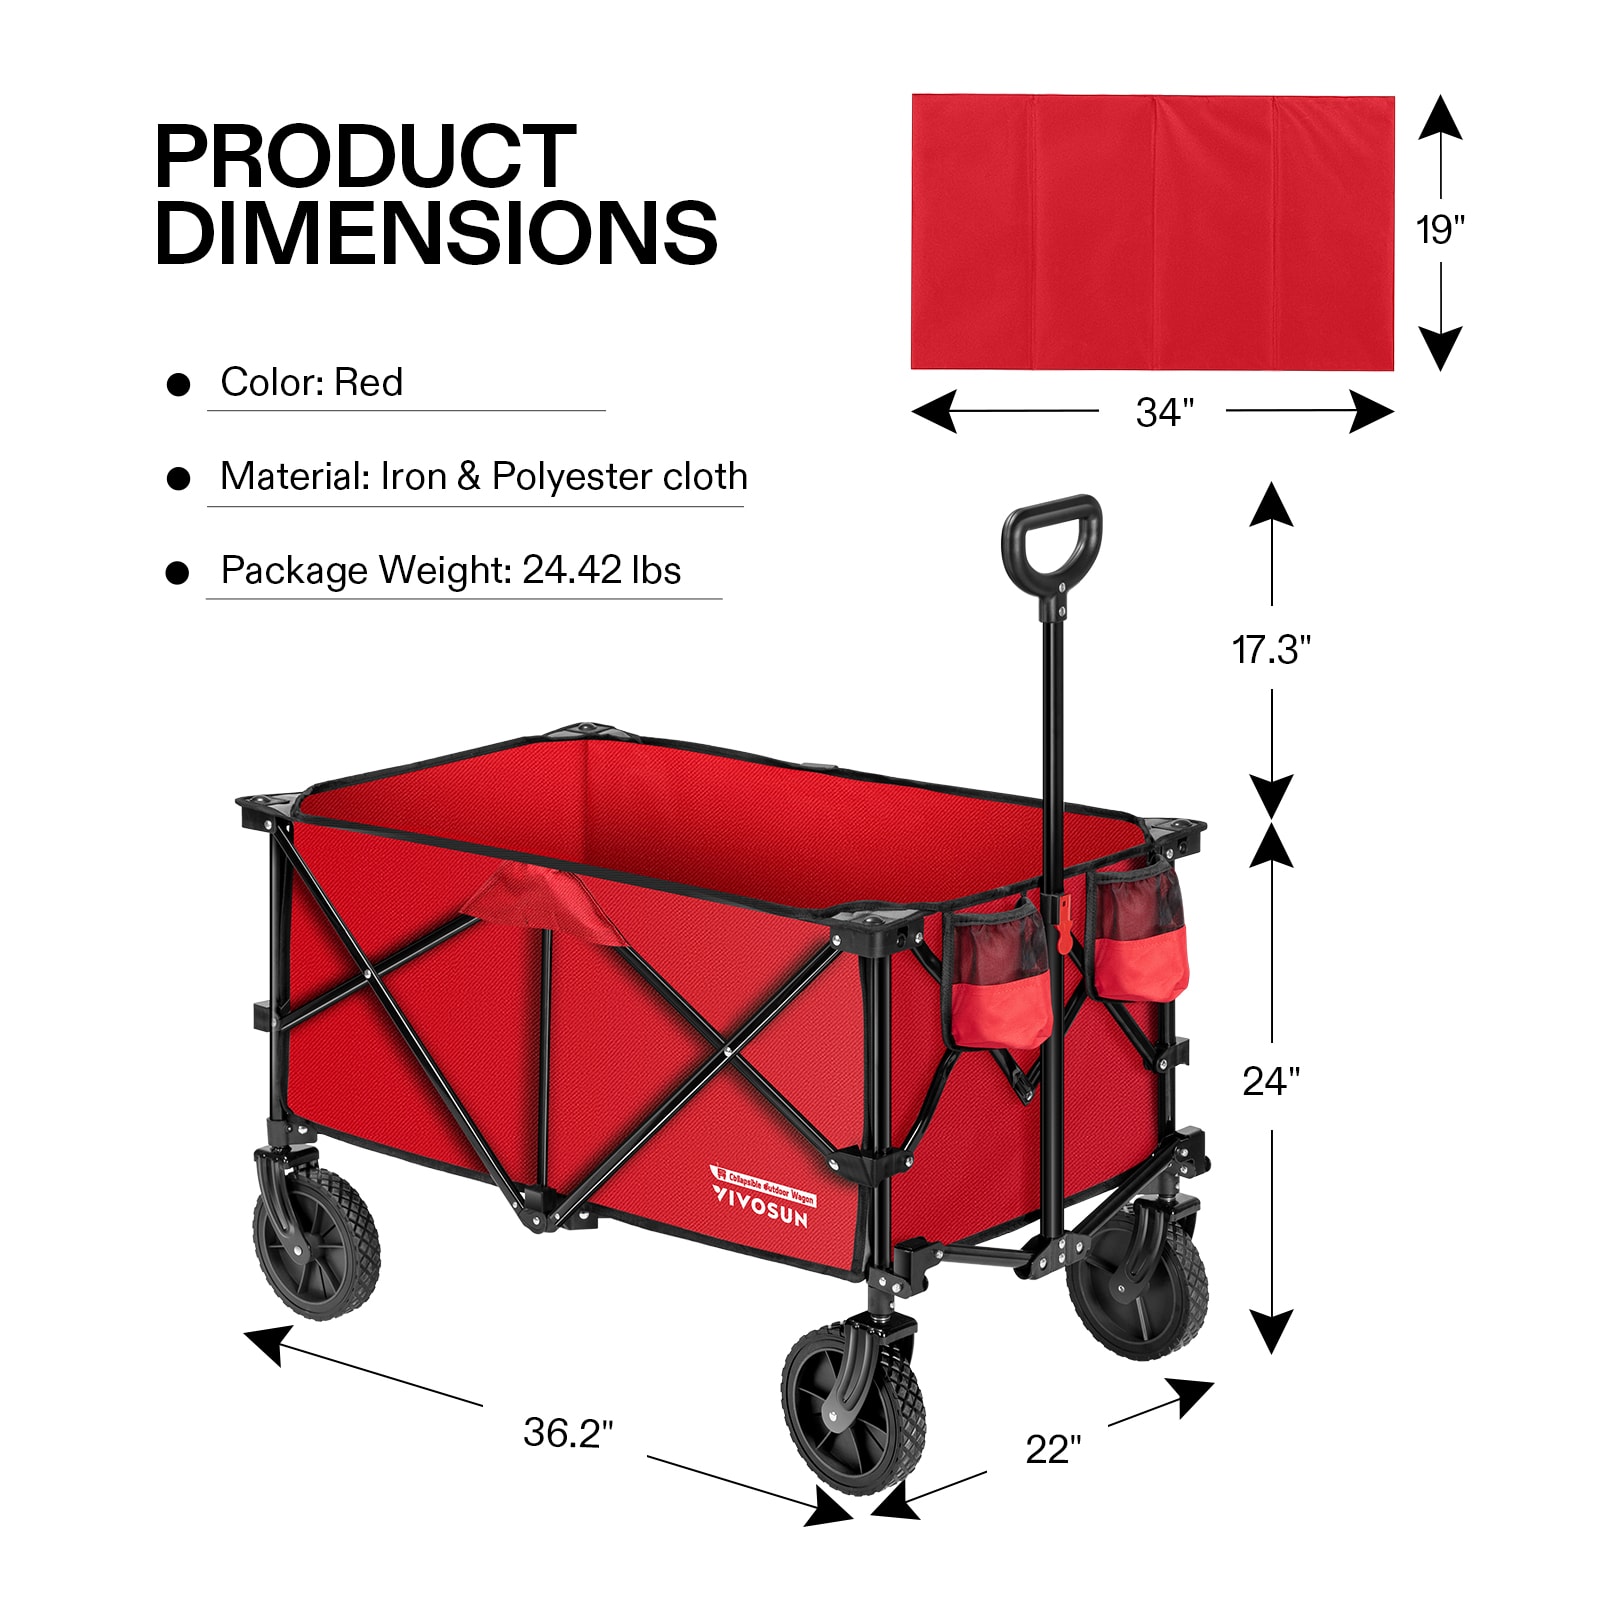 KITADIN Folding Garden Cart Outdoor Utility Collapsible Wagon Portable Heavy Duty Cart with Wheels Red 